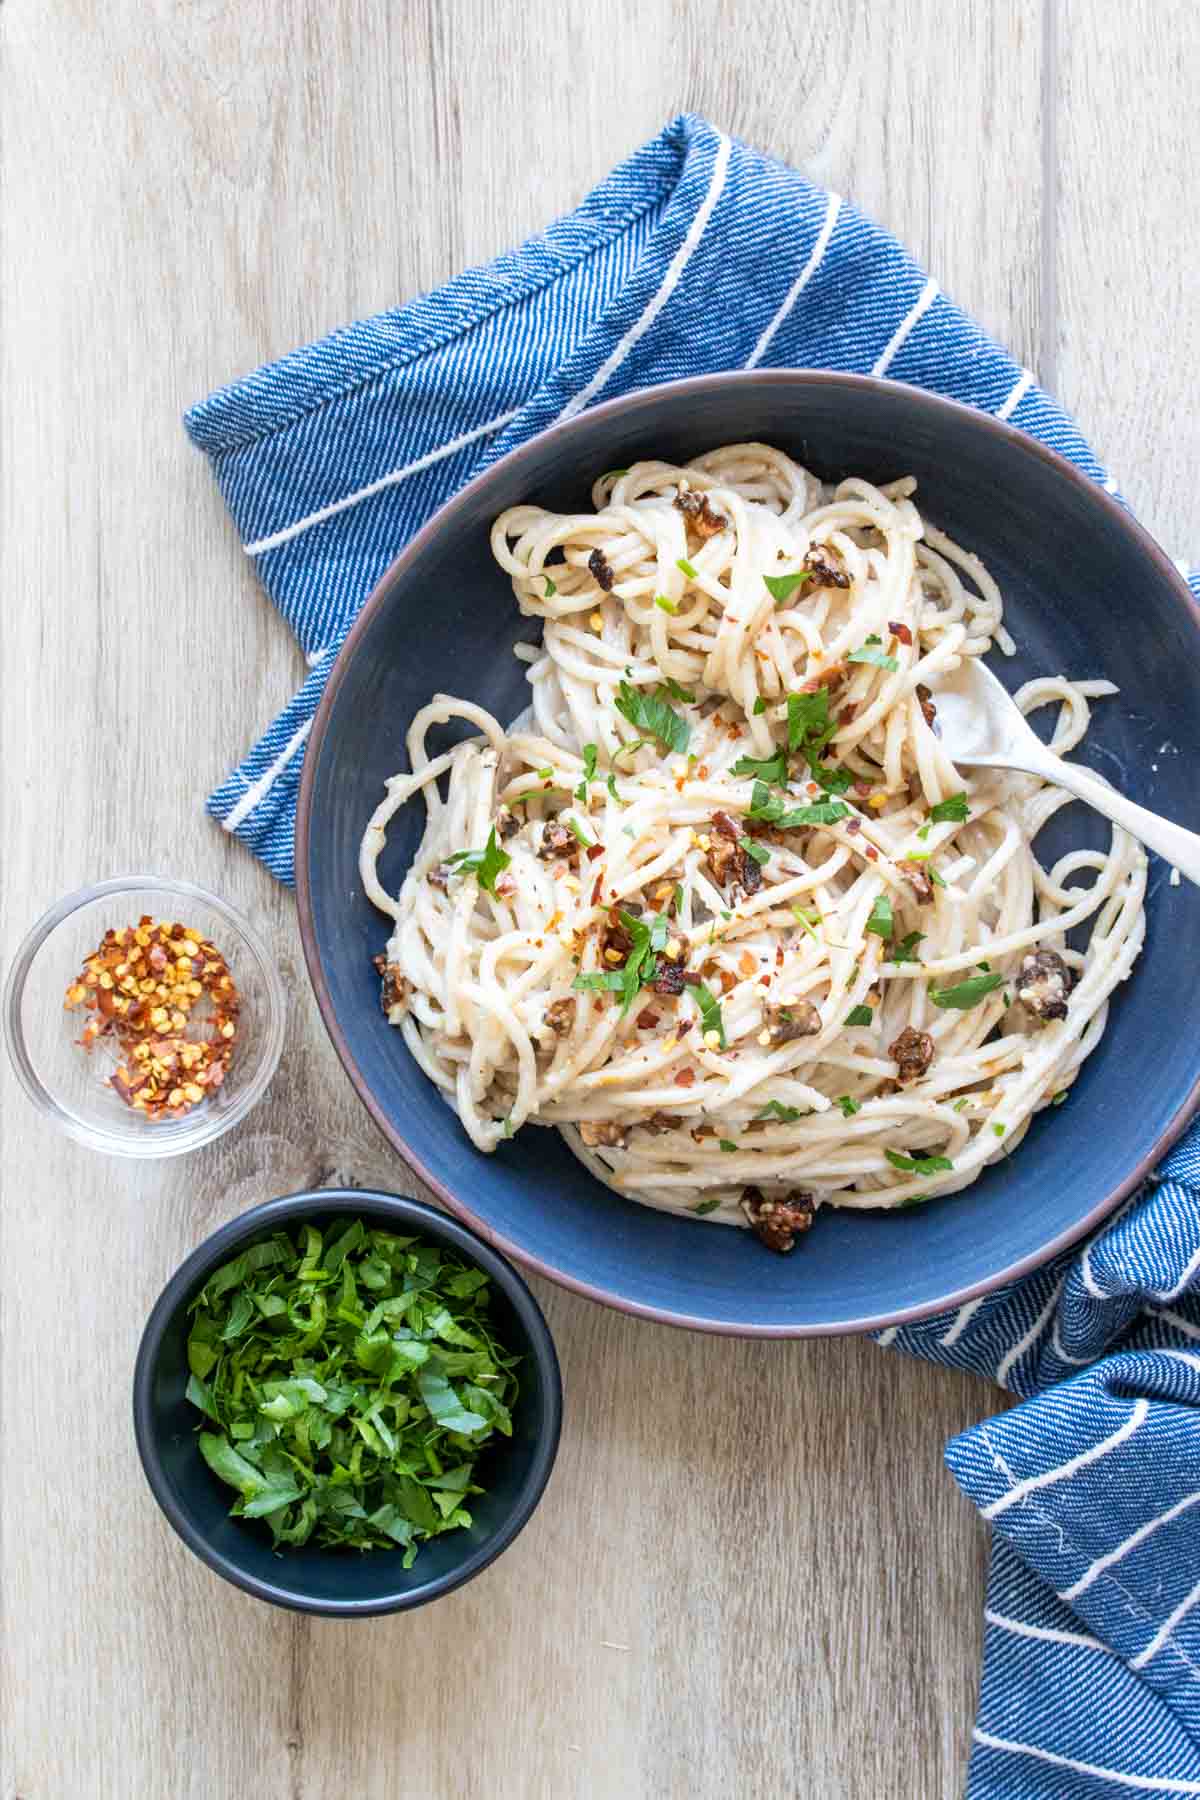 A blue bowl of spaghetti carbonara next to small bowls of parsley and red pepper flakes